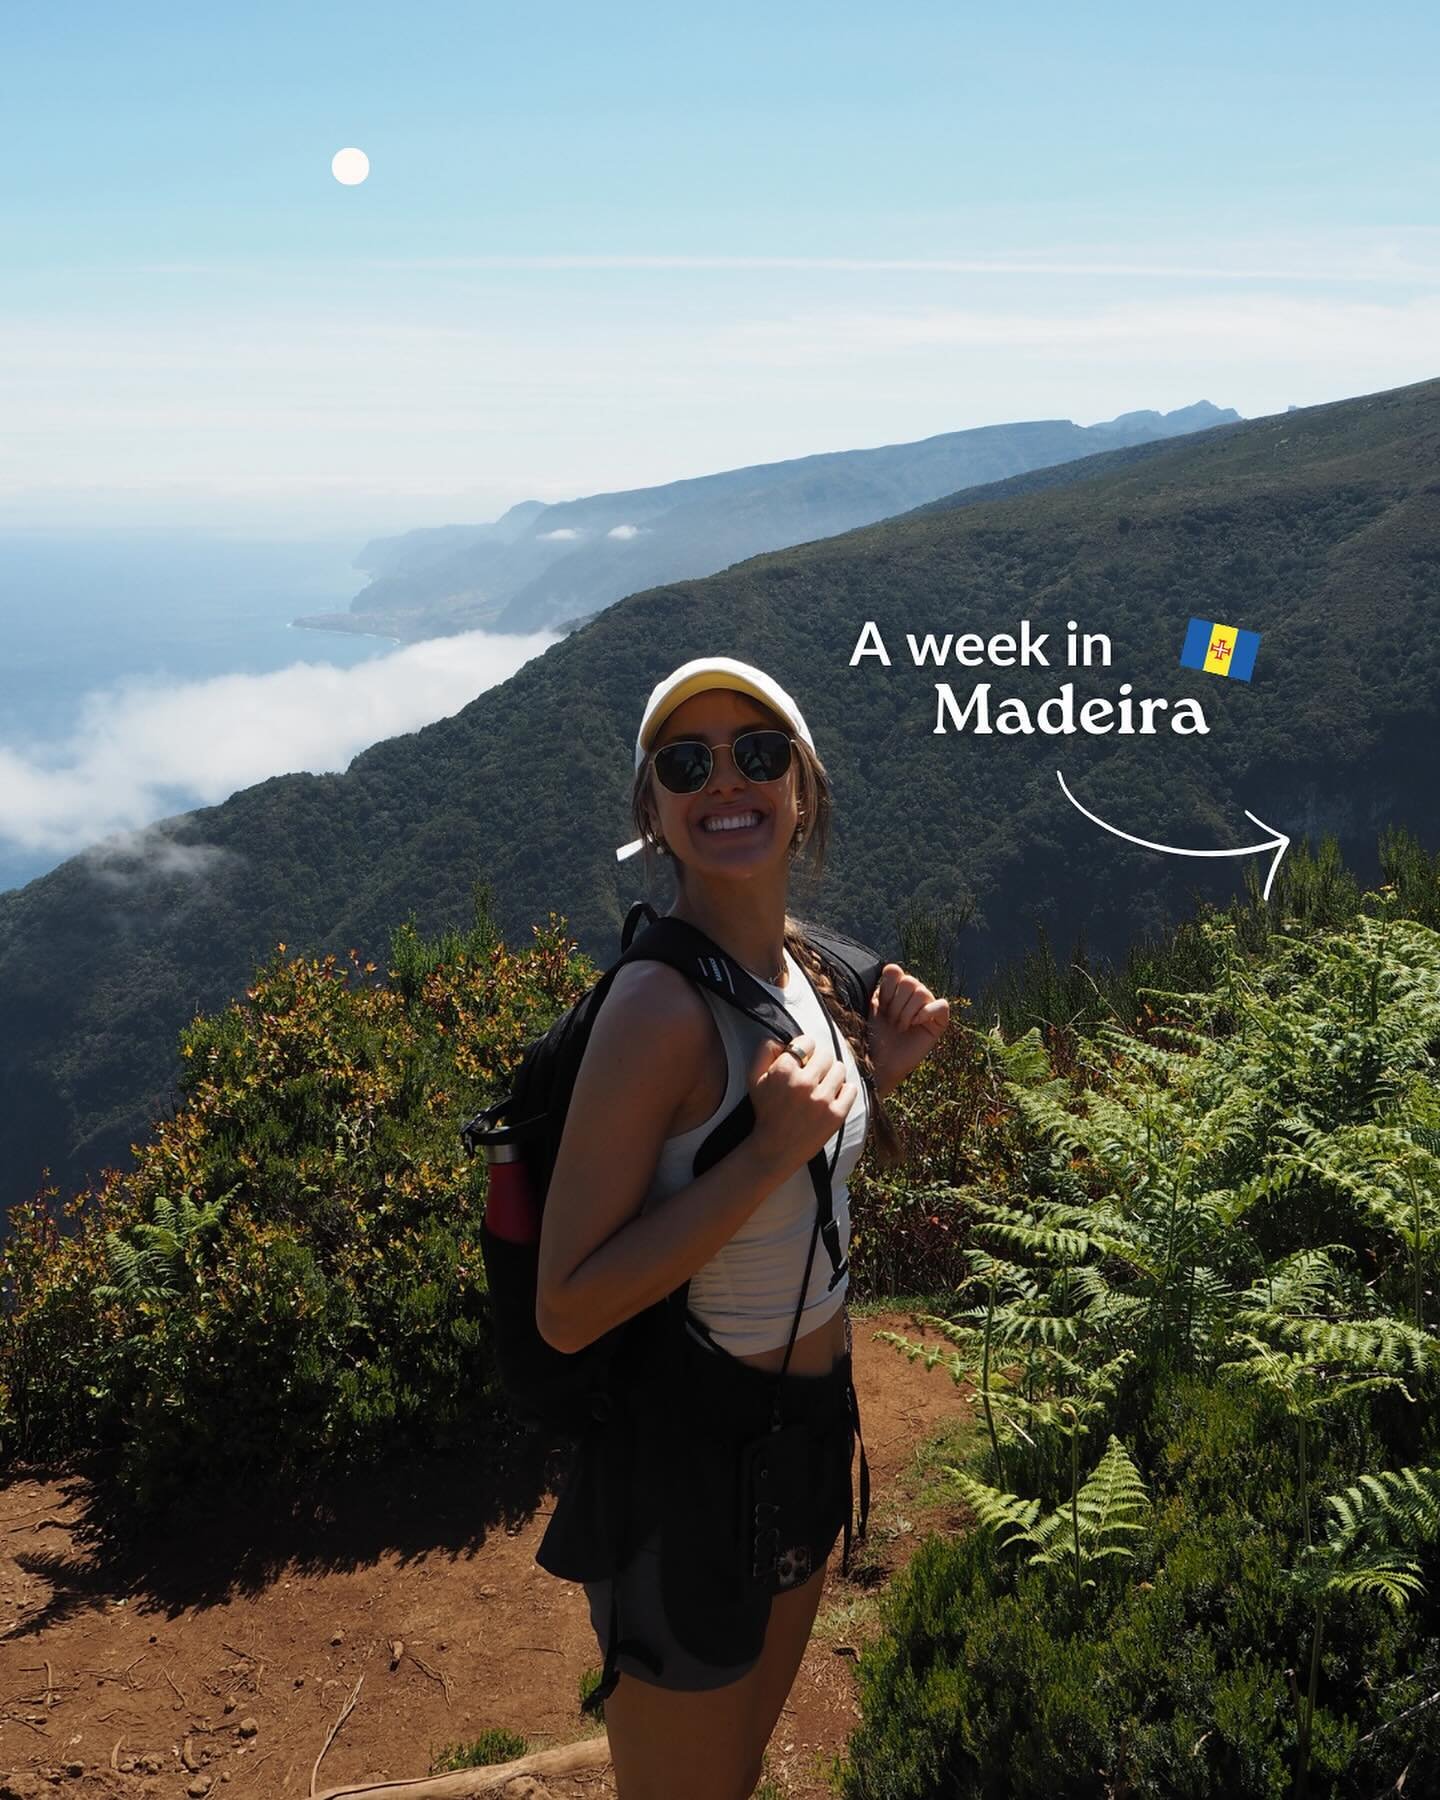 MADEIRA TRIP DETAILS 👇🏼!!

Hiking the trails of Madeira has been on my travel bucket list for a while and it did NOT disappoint 🥾💚

Where did we stay? 
👉🏼 NEXT by Savoy Signature (in Funchal) - we chose a hotel room with a lil kitchen so we cou